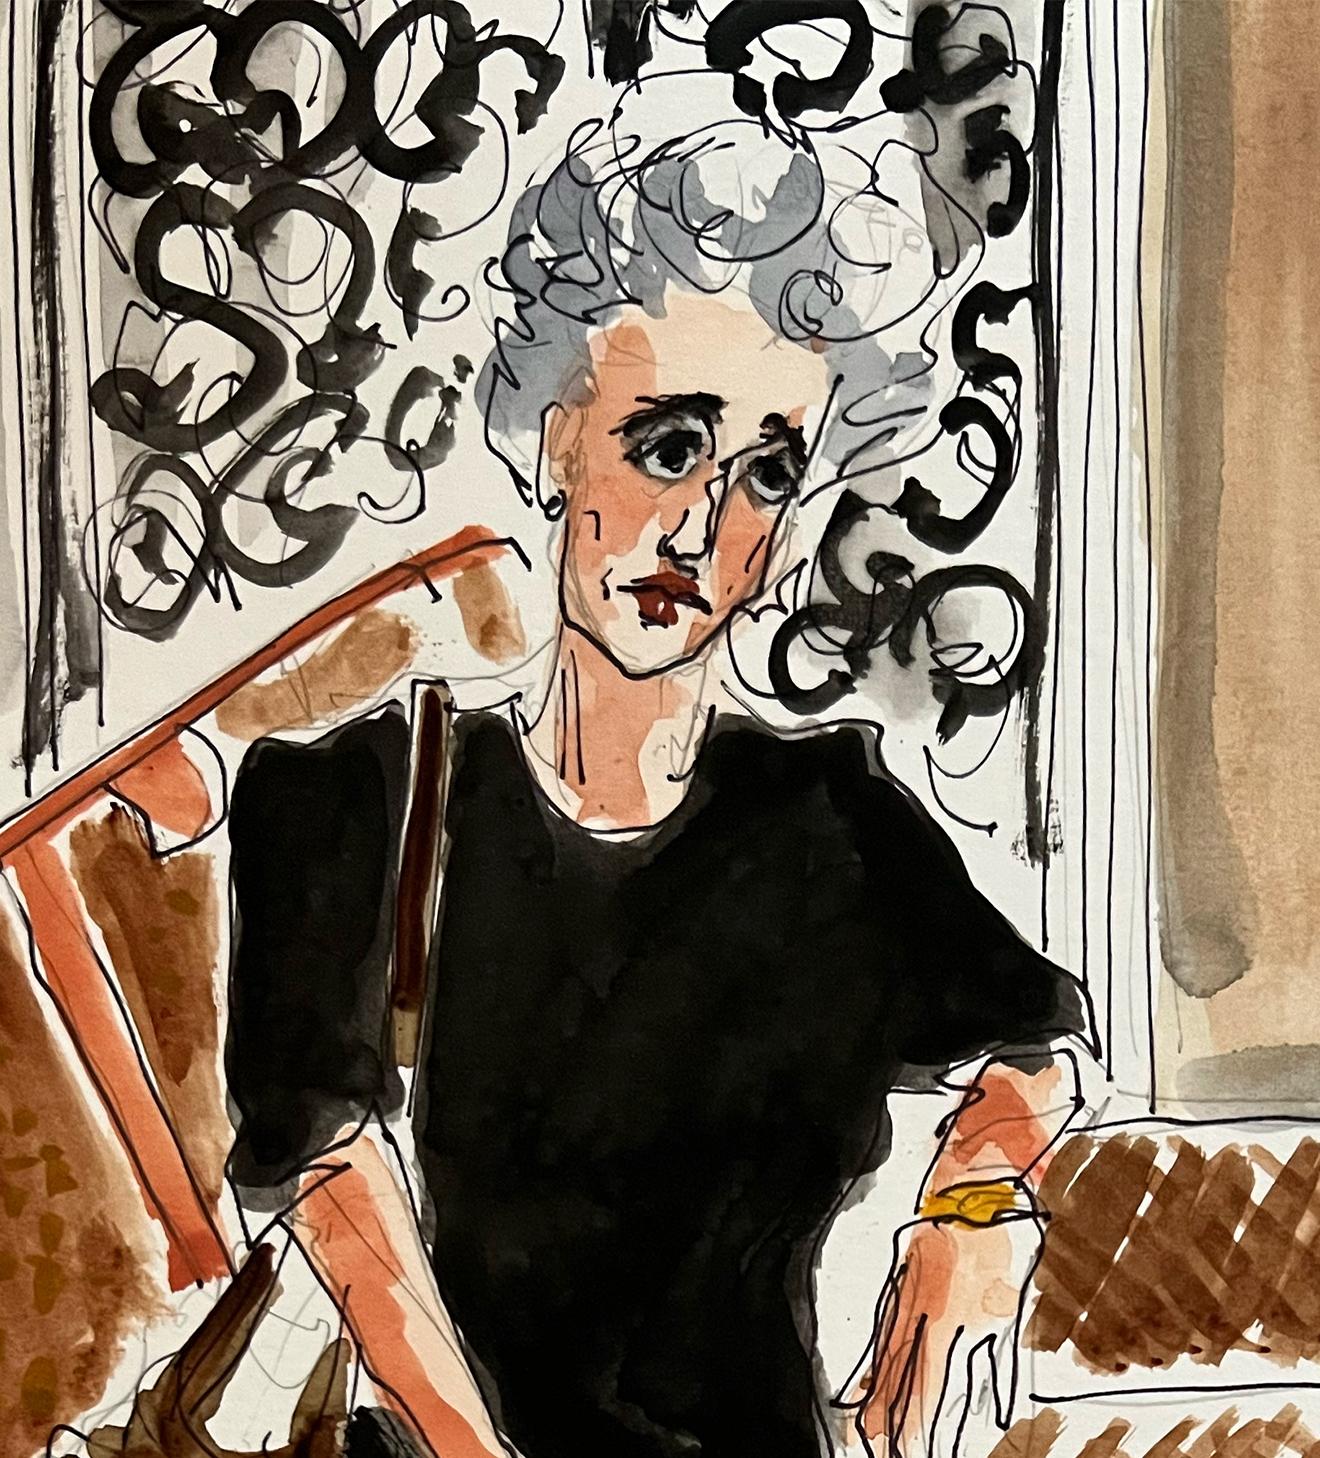 Pat Buckley leaving town, by Manuel Santelices
 Ink, watercolor, and gouache on paper
Image size: 14 in. H x 11 in. W 
Unframed
2023

The worlds of fashion, society, and pop culture are explored through the illustrations of Manuel Santelices, a